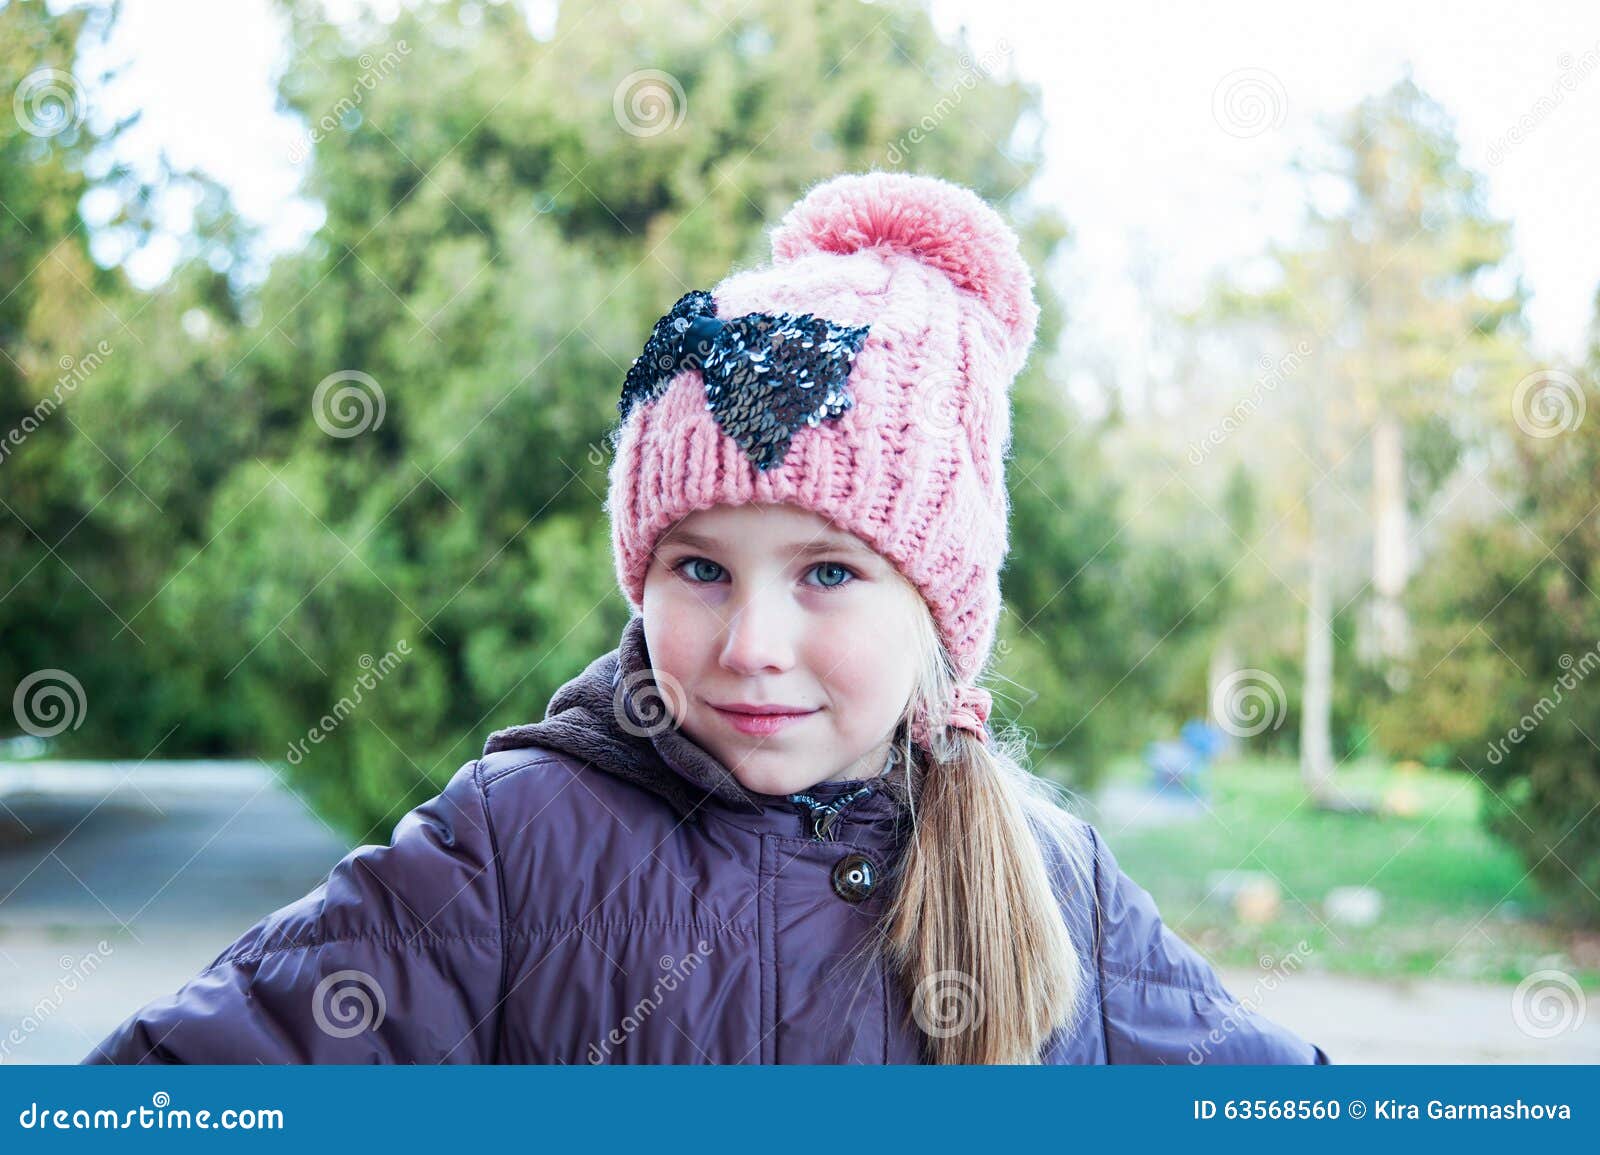 Adorable Little Girl Posing. Wearing Winter Coat And Hat. Stock Photo ...